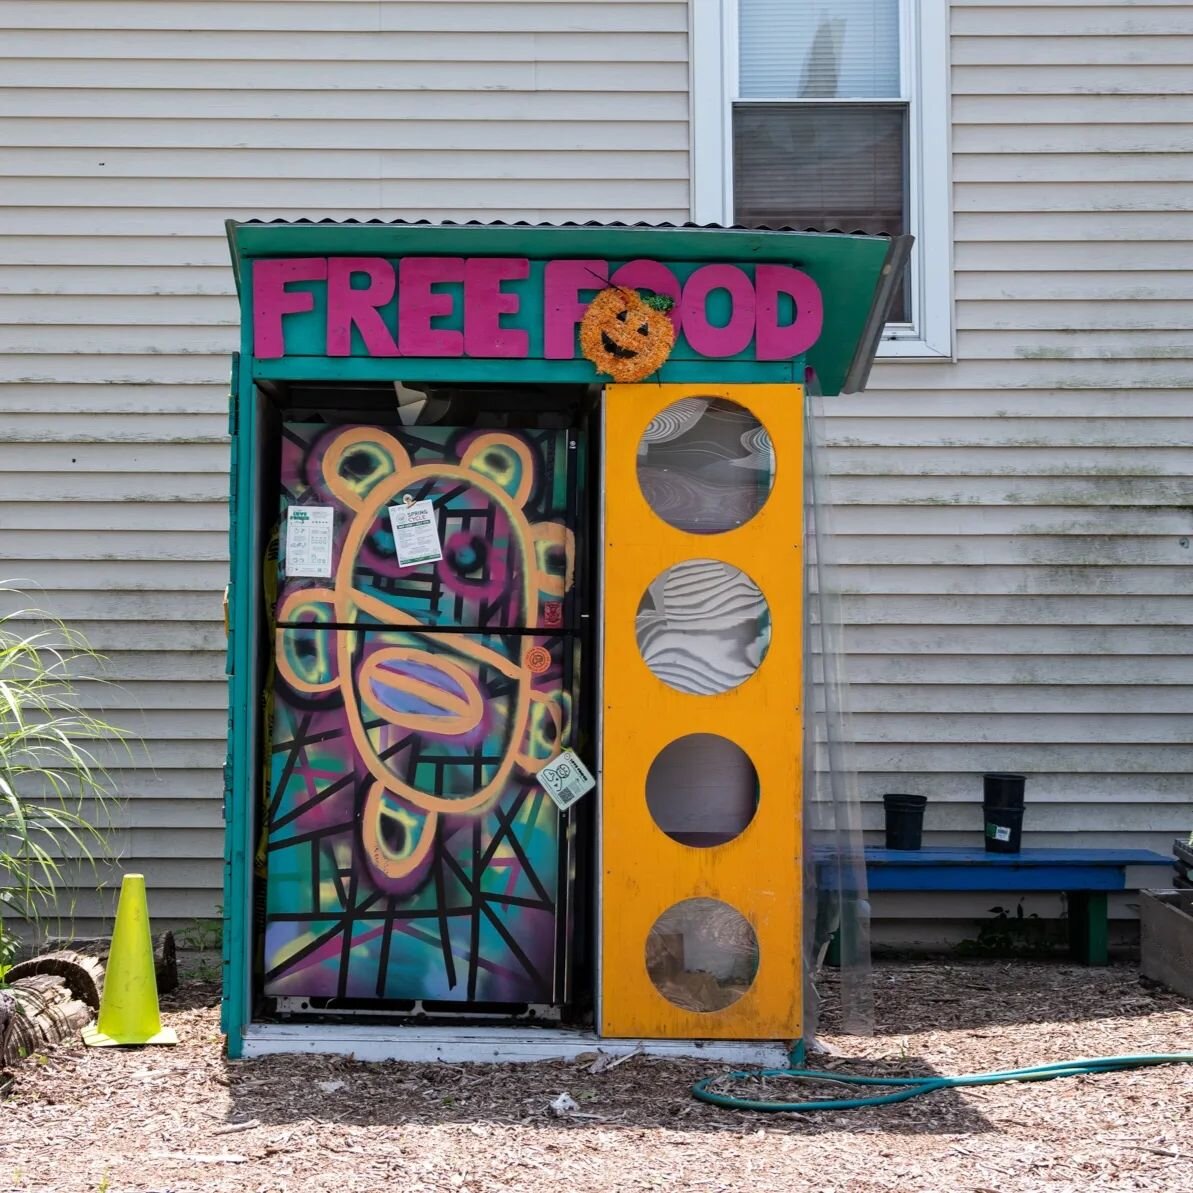 SUNday in Englewood

We are very excited to share the news that the Englewood Love Fridge is scheduled to go back online this Sunday as our first SOLAR Fridge! This marks a major milestone for the Love Fridge Network, as solar has been a goal since d